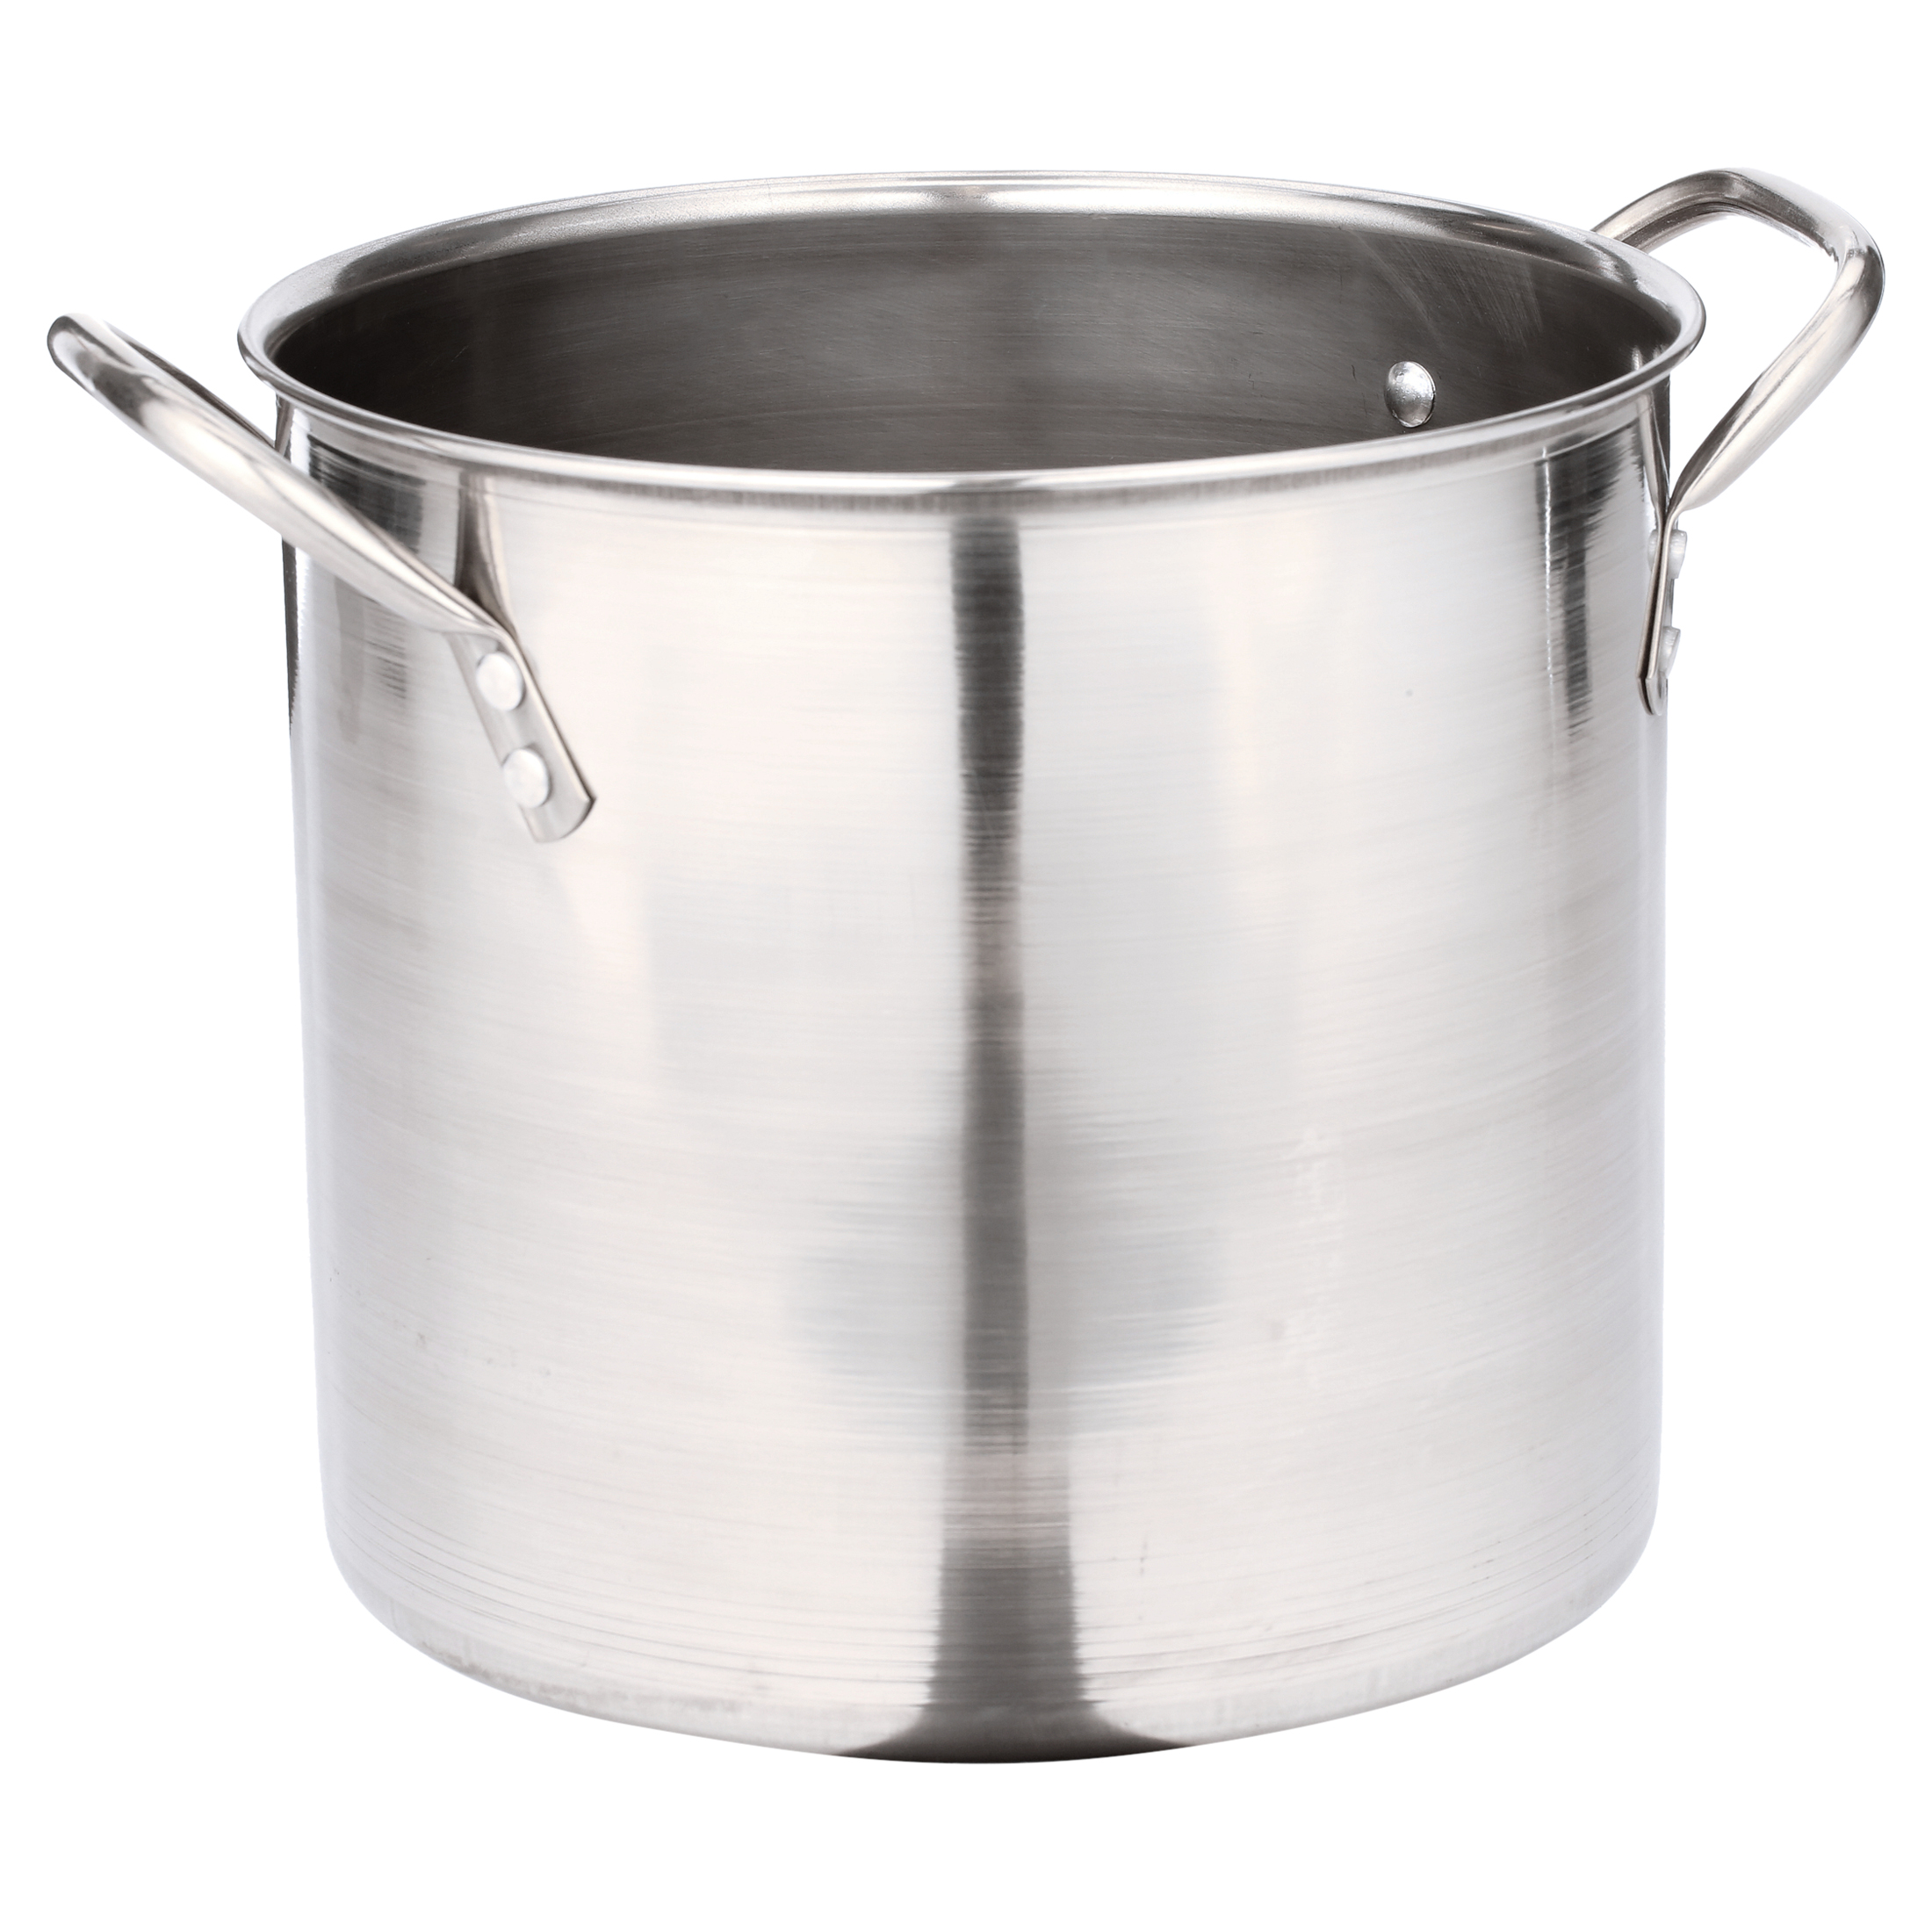 Mainstays 8-Qt Stainless Steel Stock Pot with Metal Lid - image 5 of 6